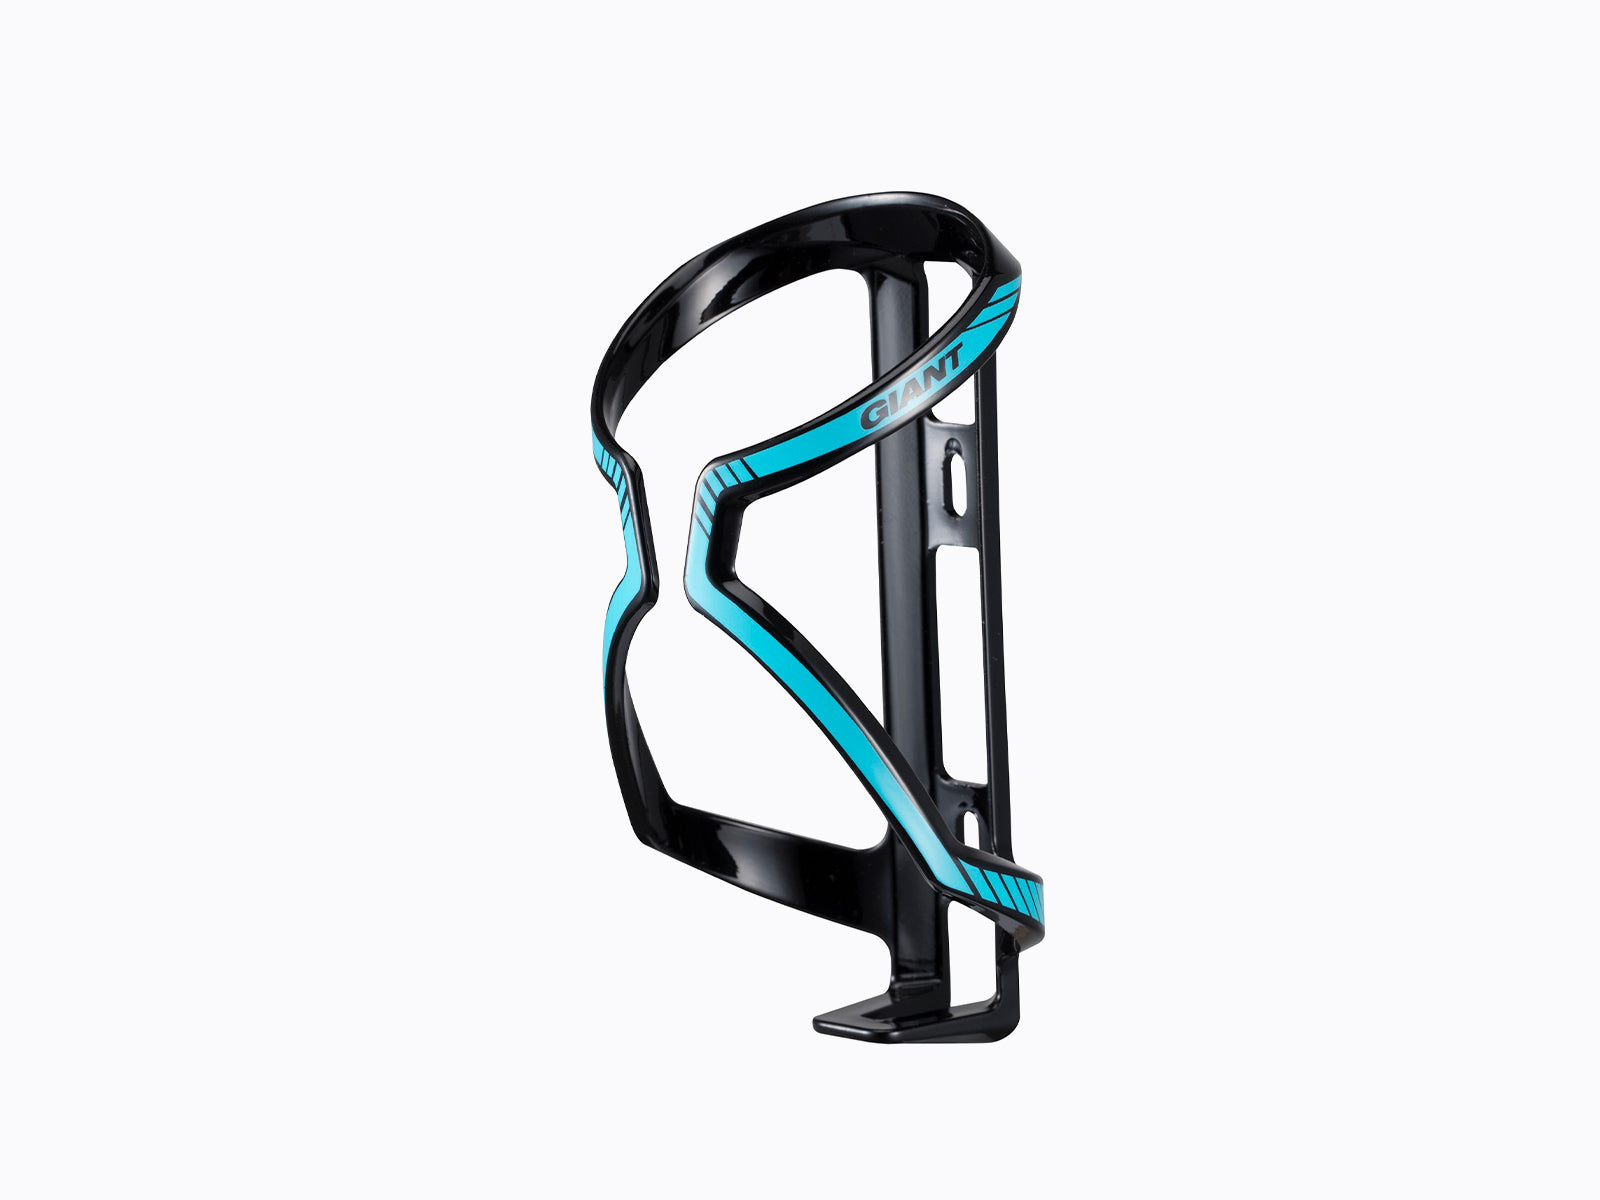 image features a Giant Airway Sport bottle cage, designed to add an extra layer of convenience to your journey